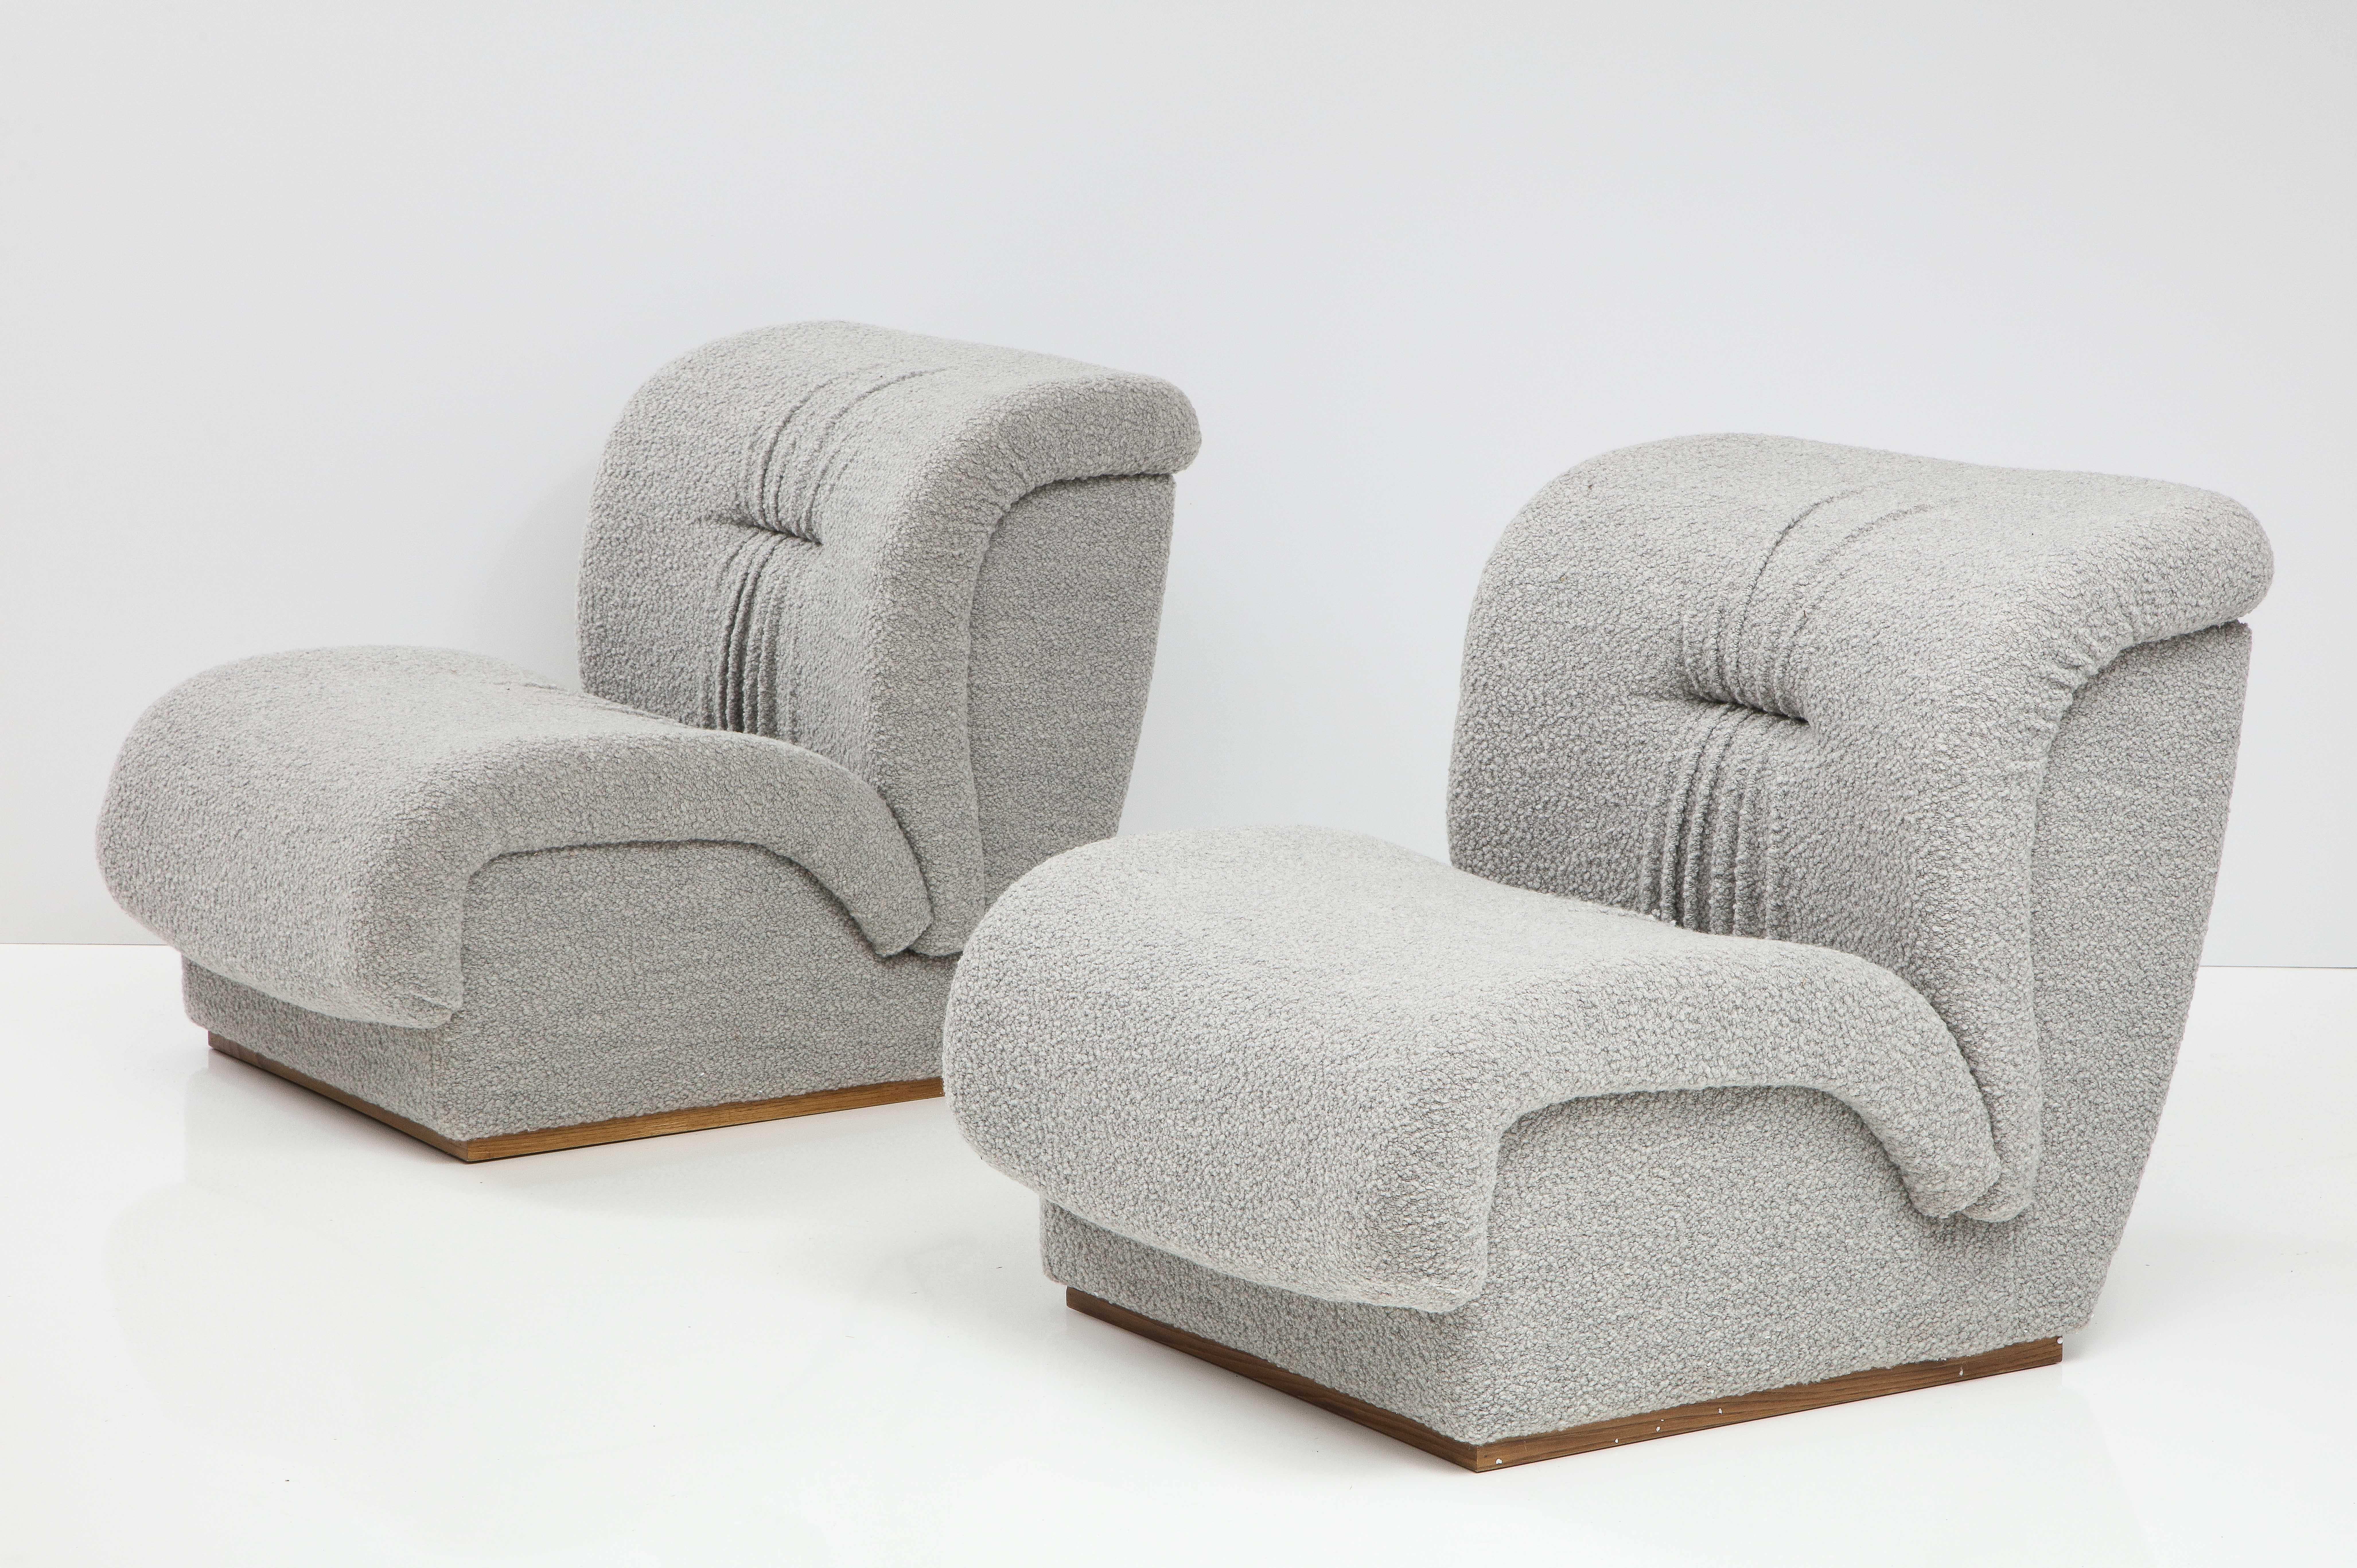 Pair of Slipper Lounge Chairs in Grey Boucle by Doimo Salotti, Italy, circa 1970 In Good Condition For Sale In New York, NY